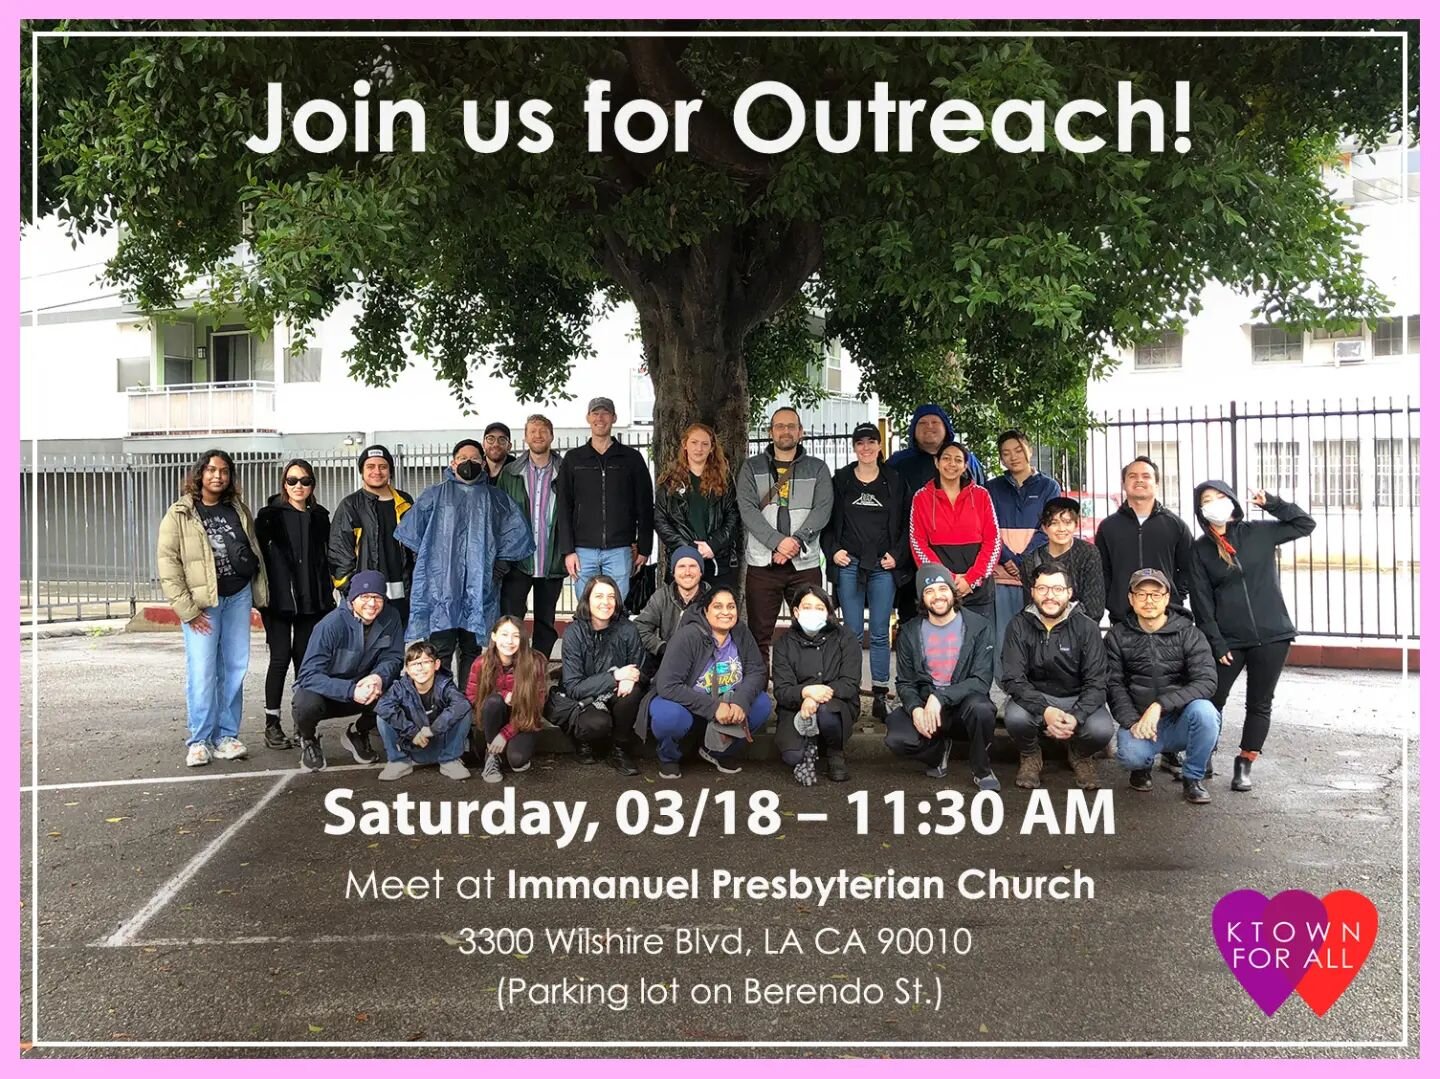 Join us for outreach tomorrow! We meet in the Immanuel Presbyterian Church parking lot at 11:30am. Parking is available in the lot. Hope to see you there!